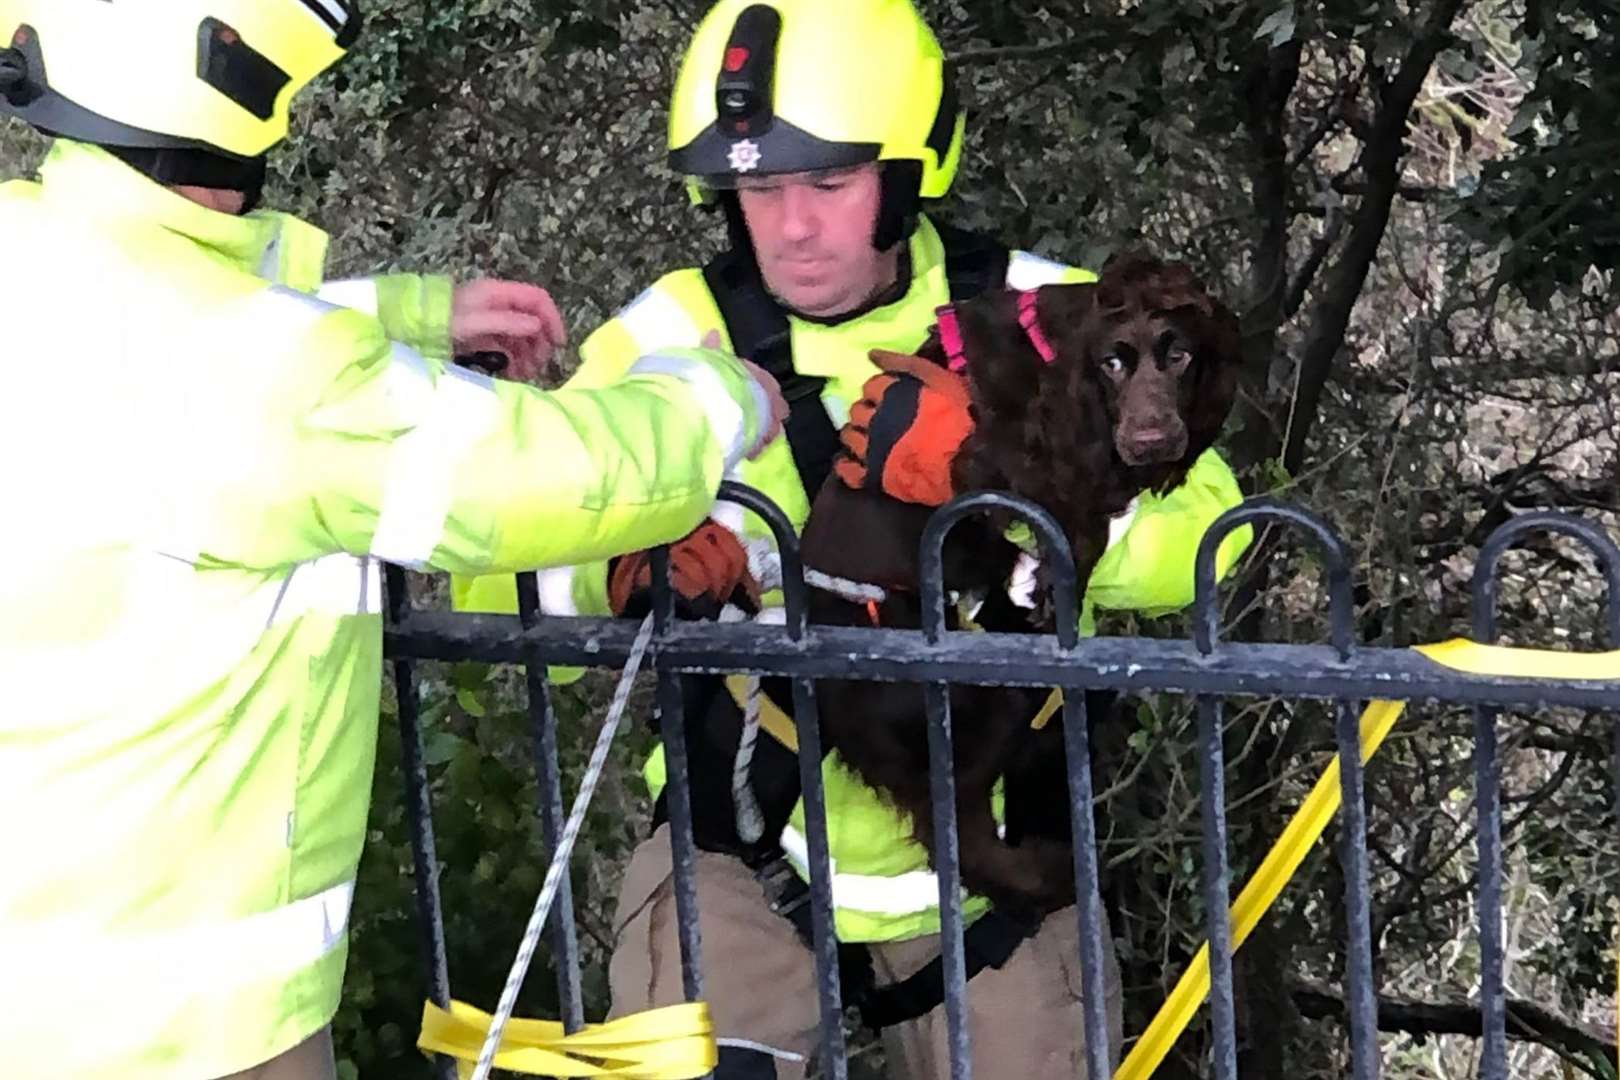 The spaniel was rescued after falling down a cliff in Folkestone. Photo: Peter Phillips